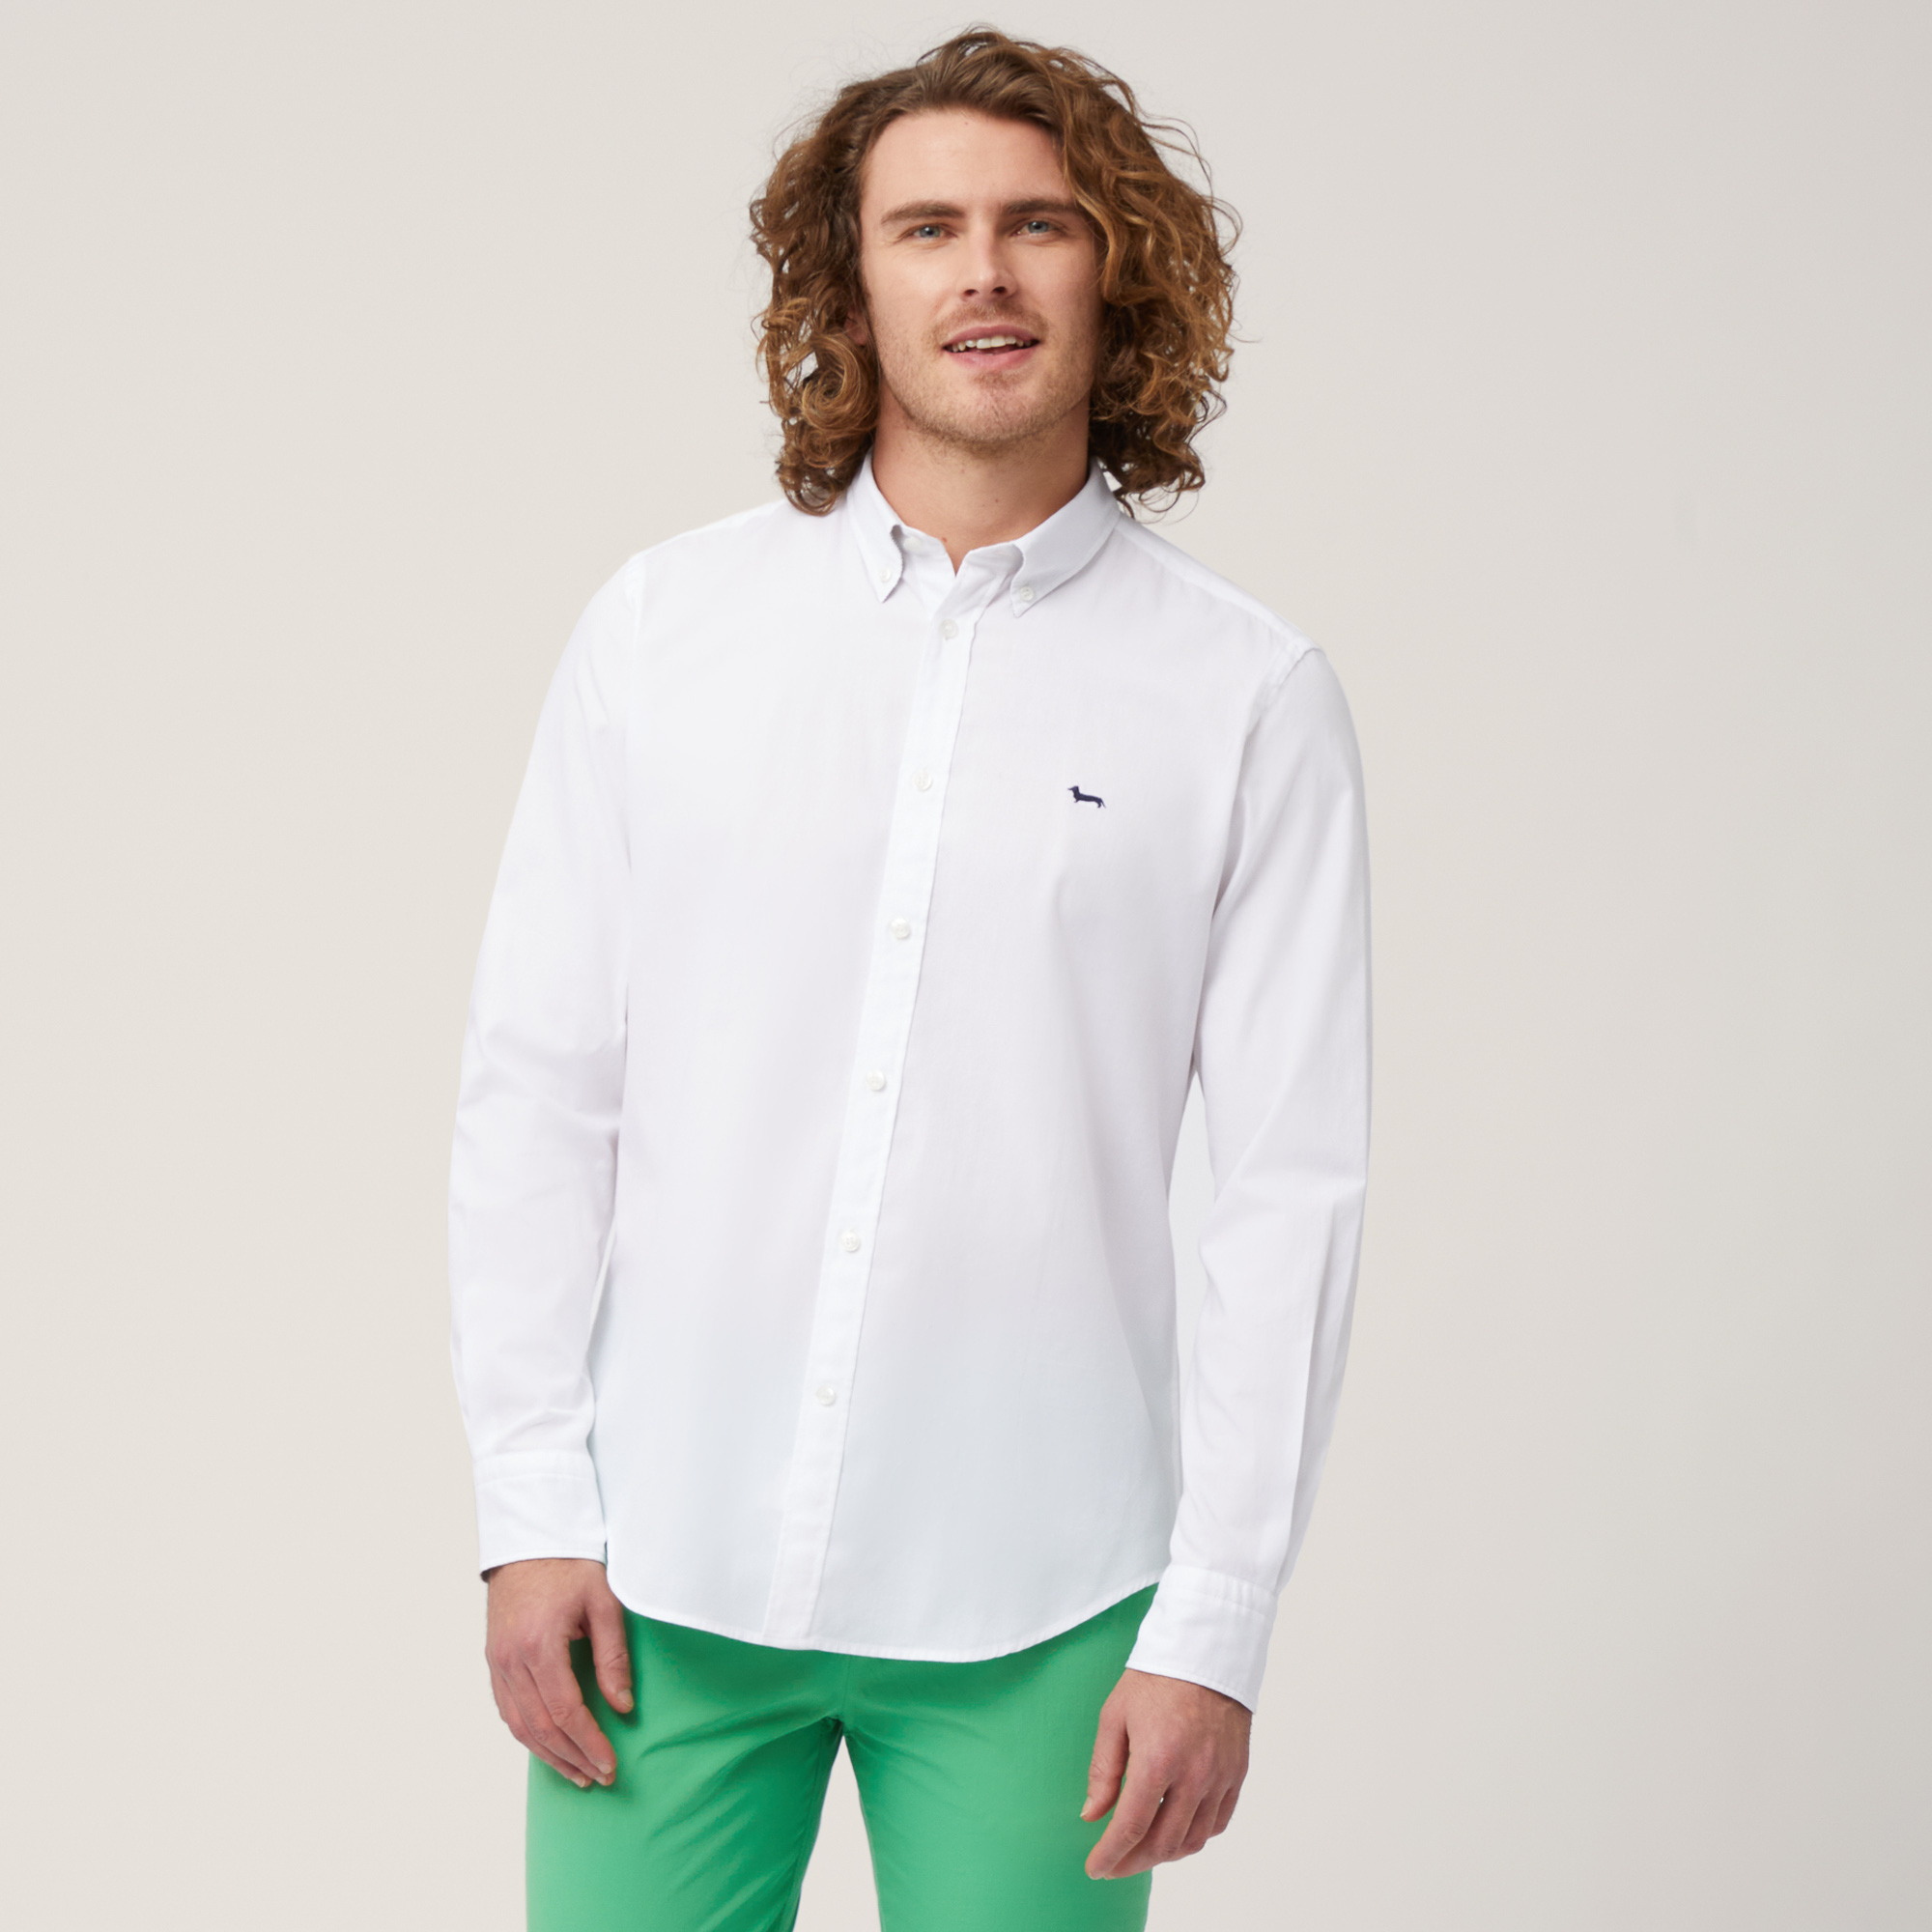 Cotton Shirt with Contrasting Inner Detail, White, large